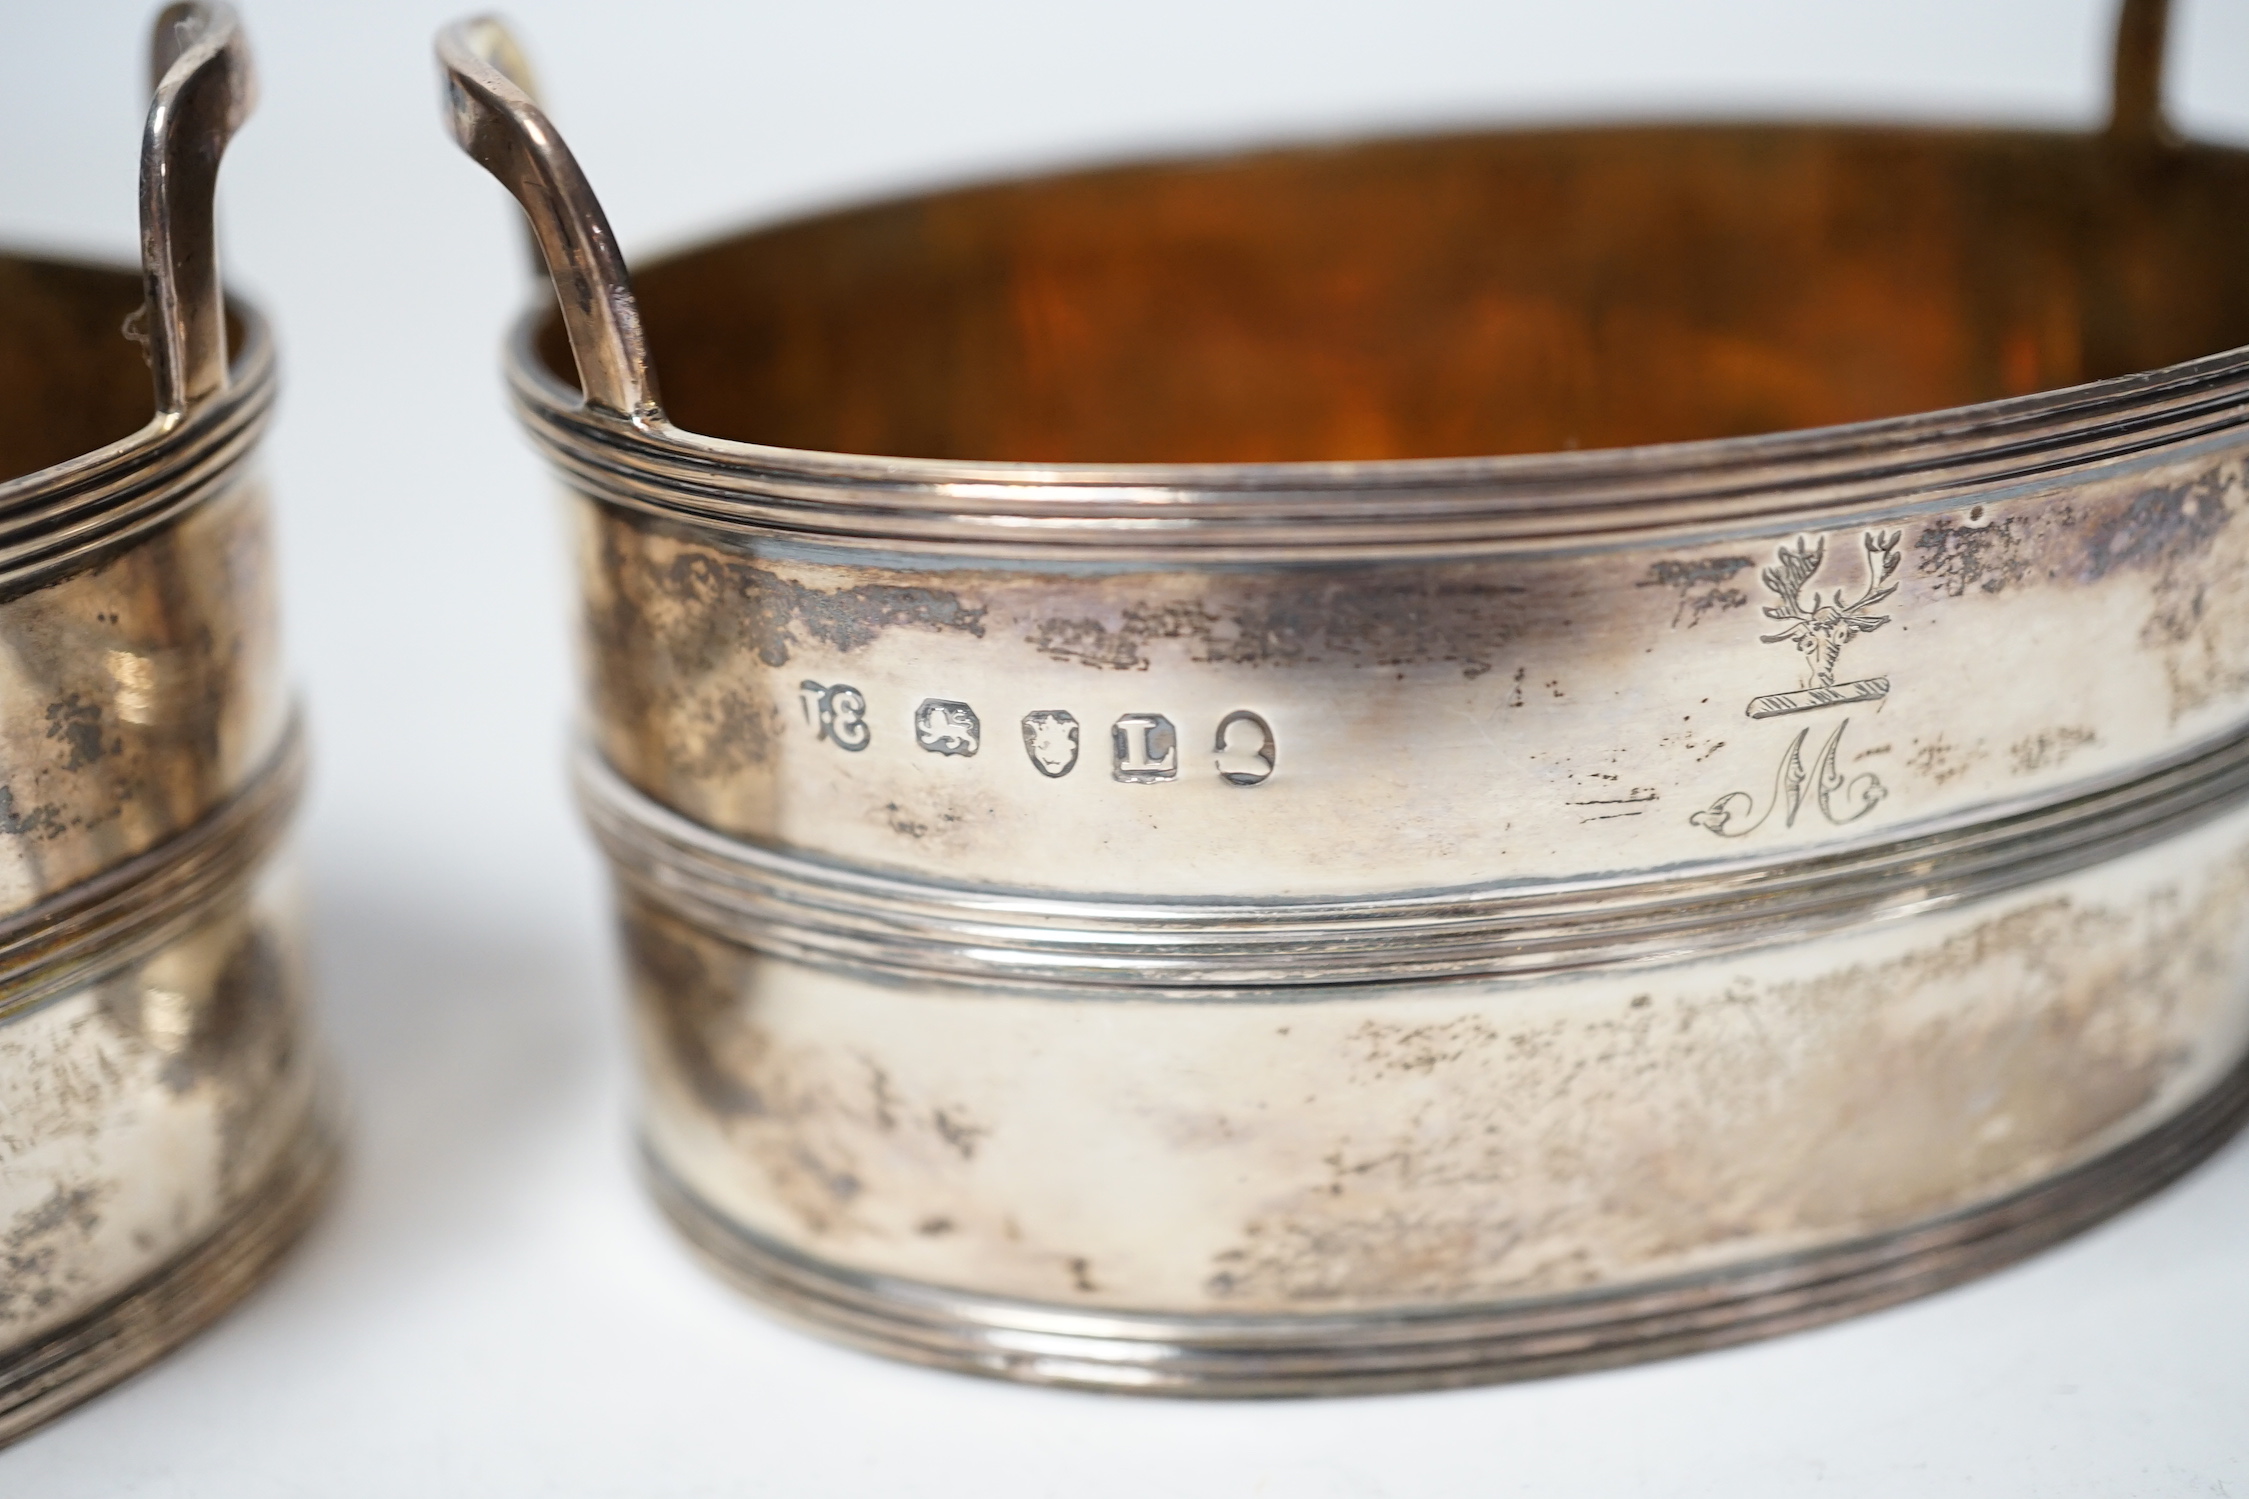 A pair of George III silver salts, modelled and oval two handled tubs, by John Emes, with reeded bands and engraved crest, 89mm.